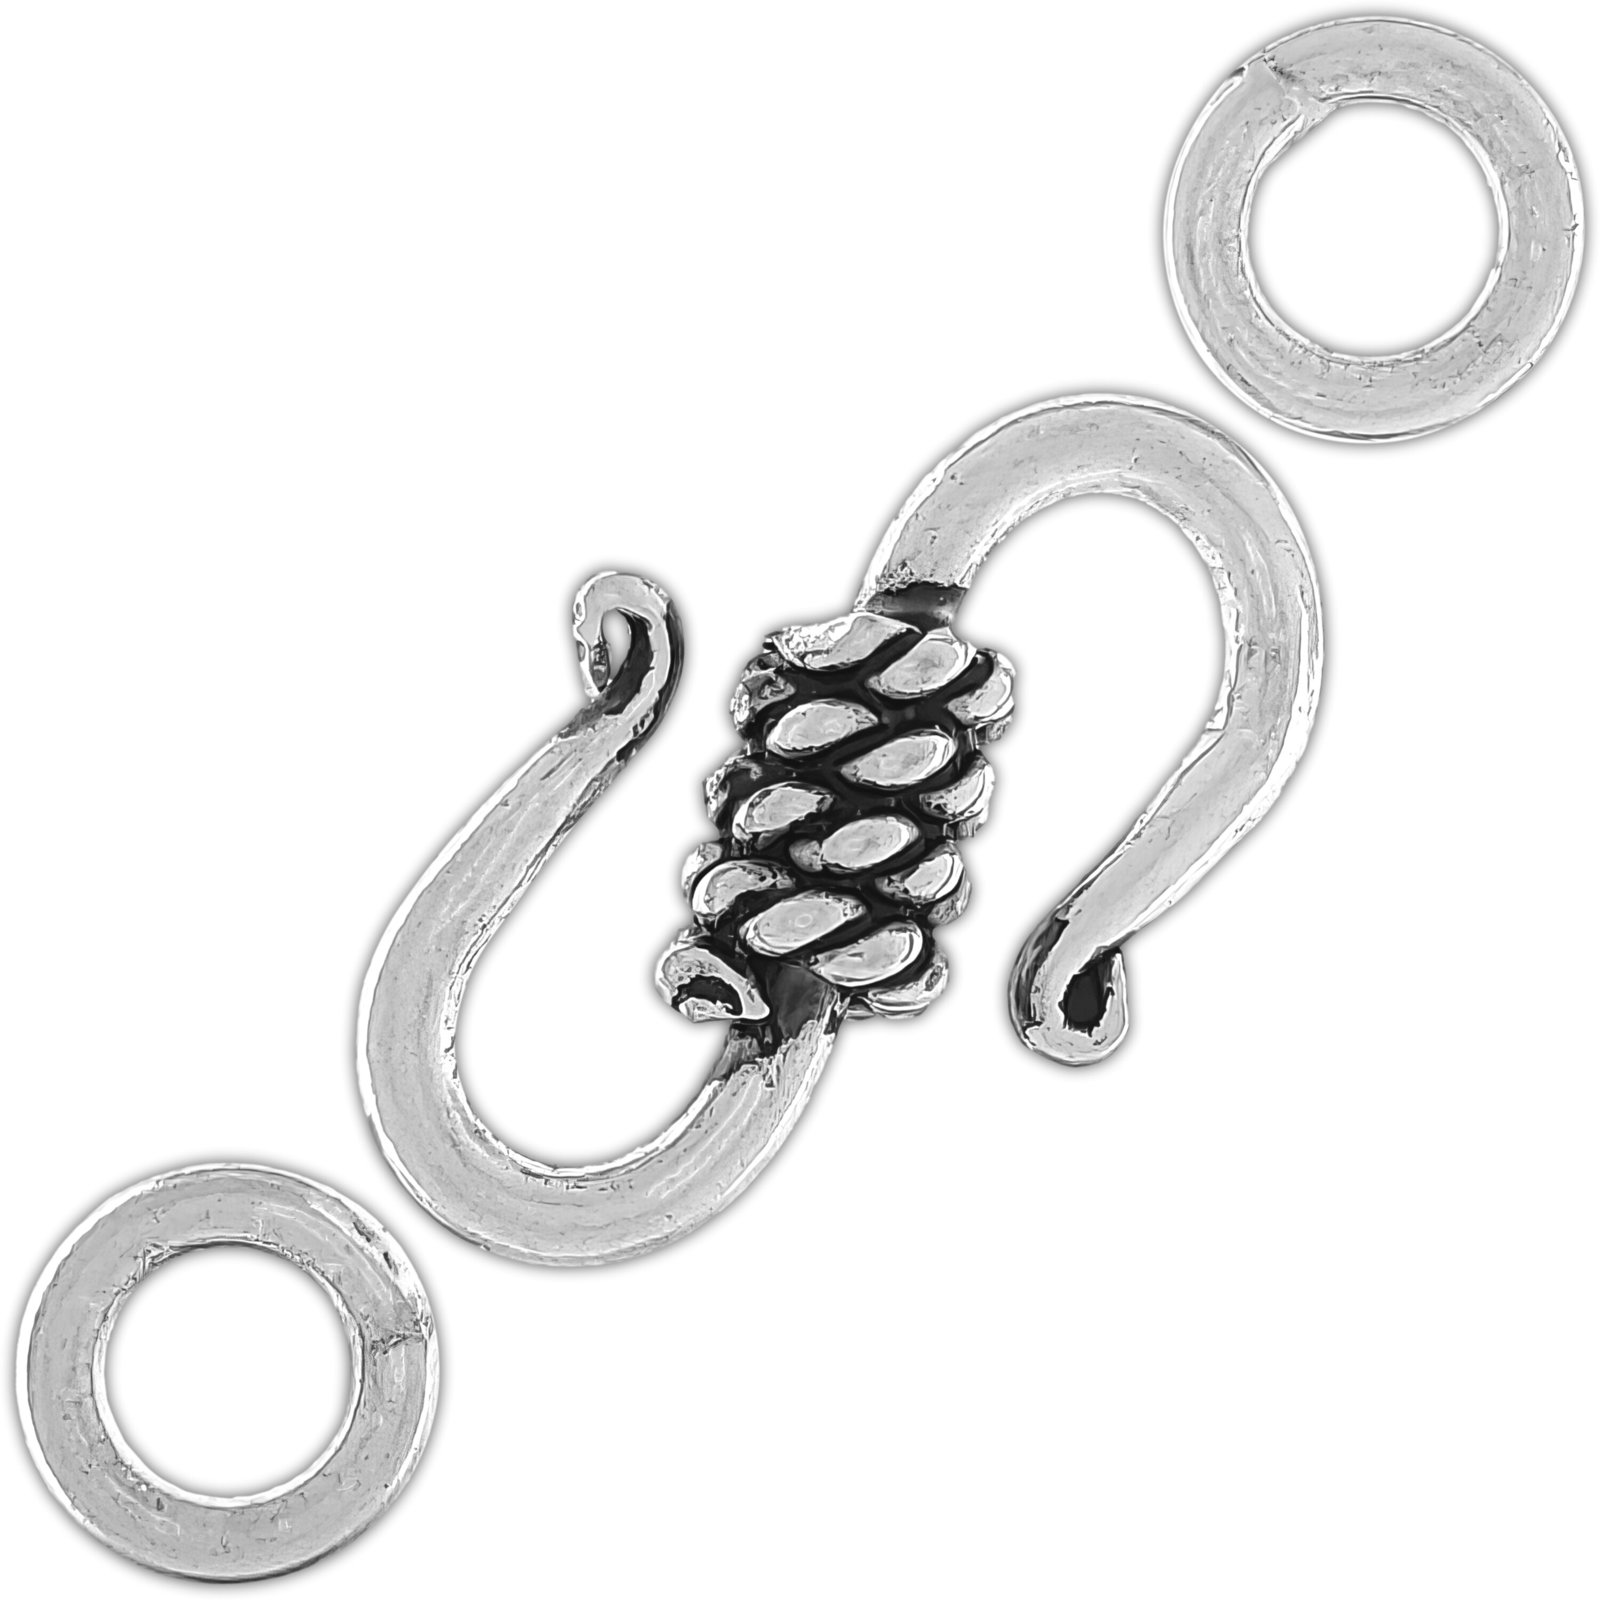 Bali .925 Solid Sterling Silver Fancy "S" Hook & Rings Clasp Closure -   - $7.37